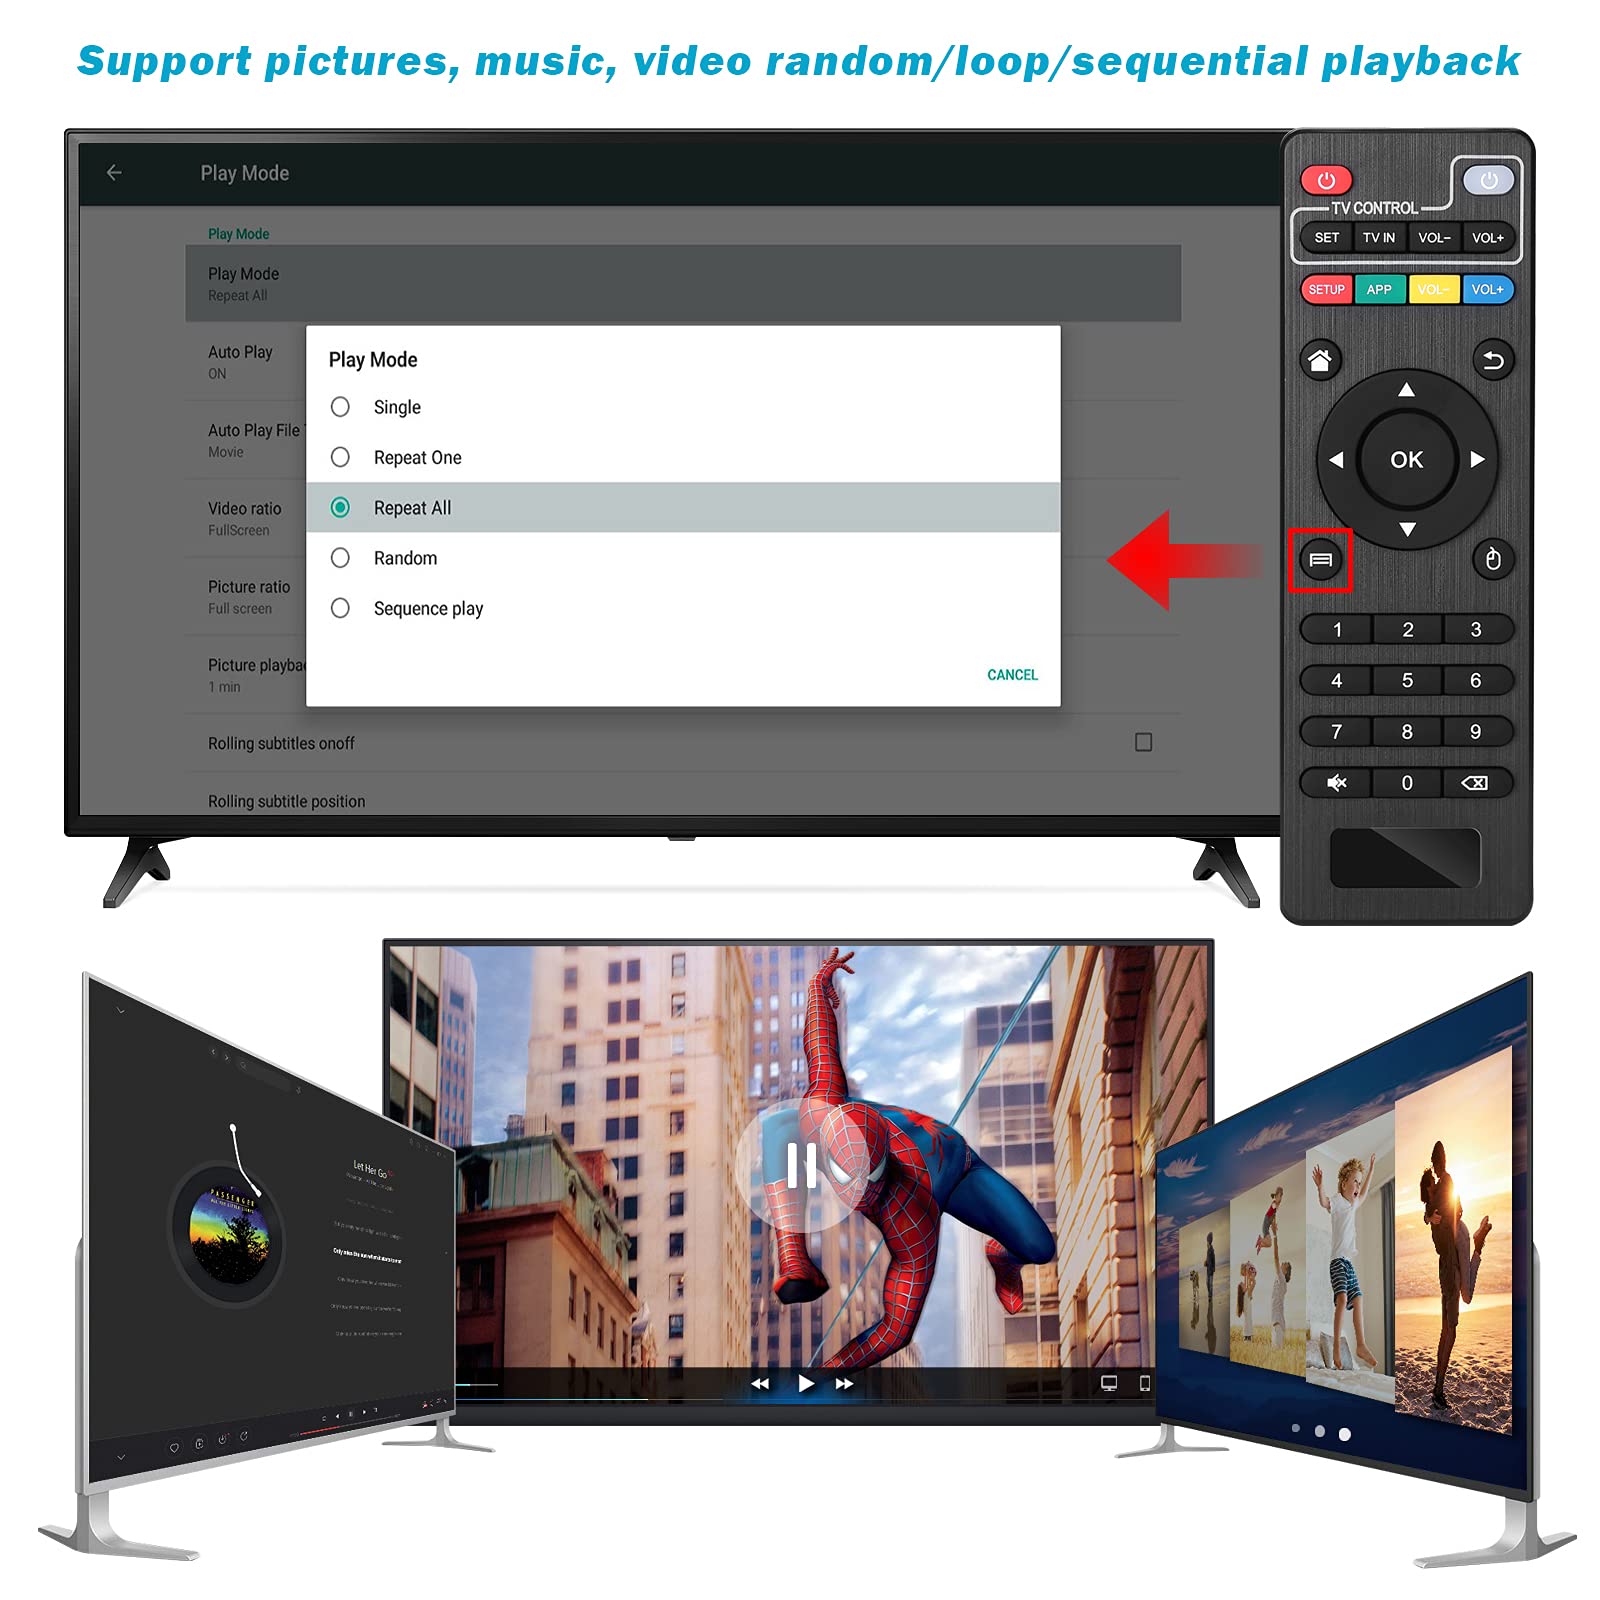 4K@60hz MP4 Media Player&Remote Control, Support 8TB HDD/ 256G USB Drive/SD Card with HDMI/AV Out for HDTV/PPT MKV AVI MP4 H.265-Support Advertising Subtitles/Timing,Networkable,Mouse&Keyboard Control